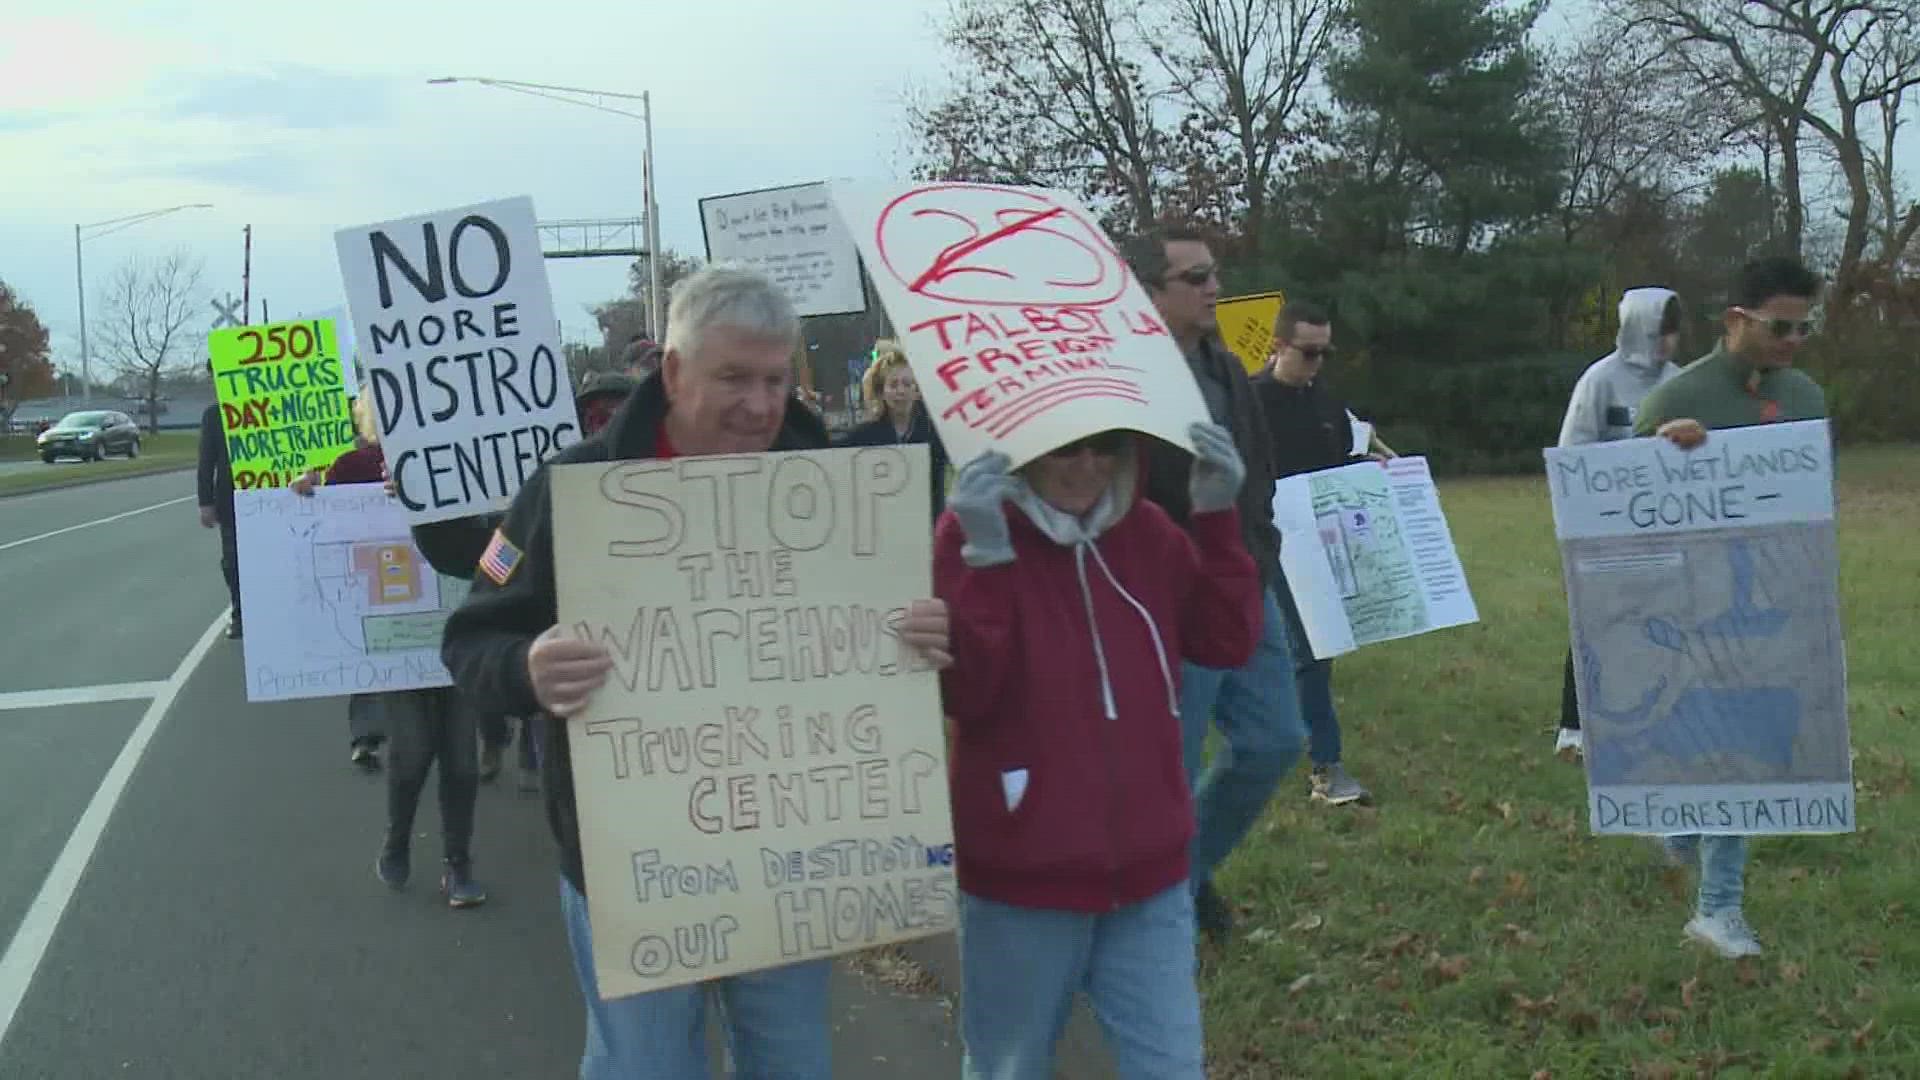 Residents protested against development plans for a new warehouse in South Windsor Sunday.